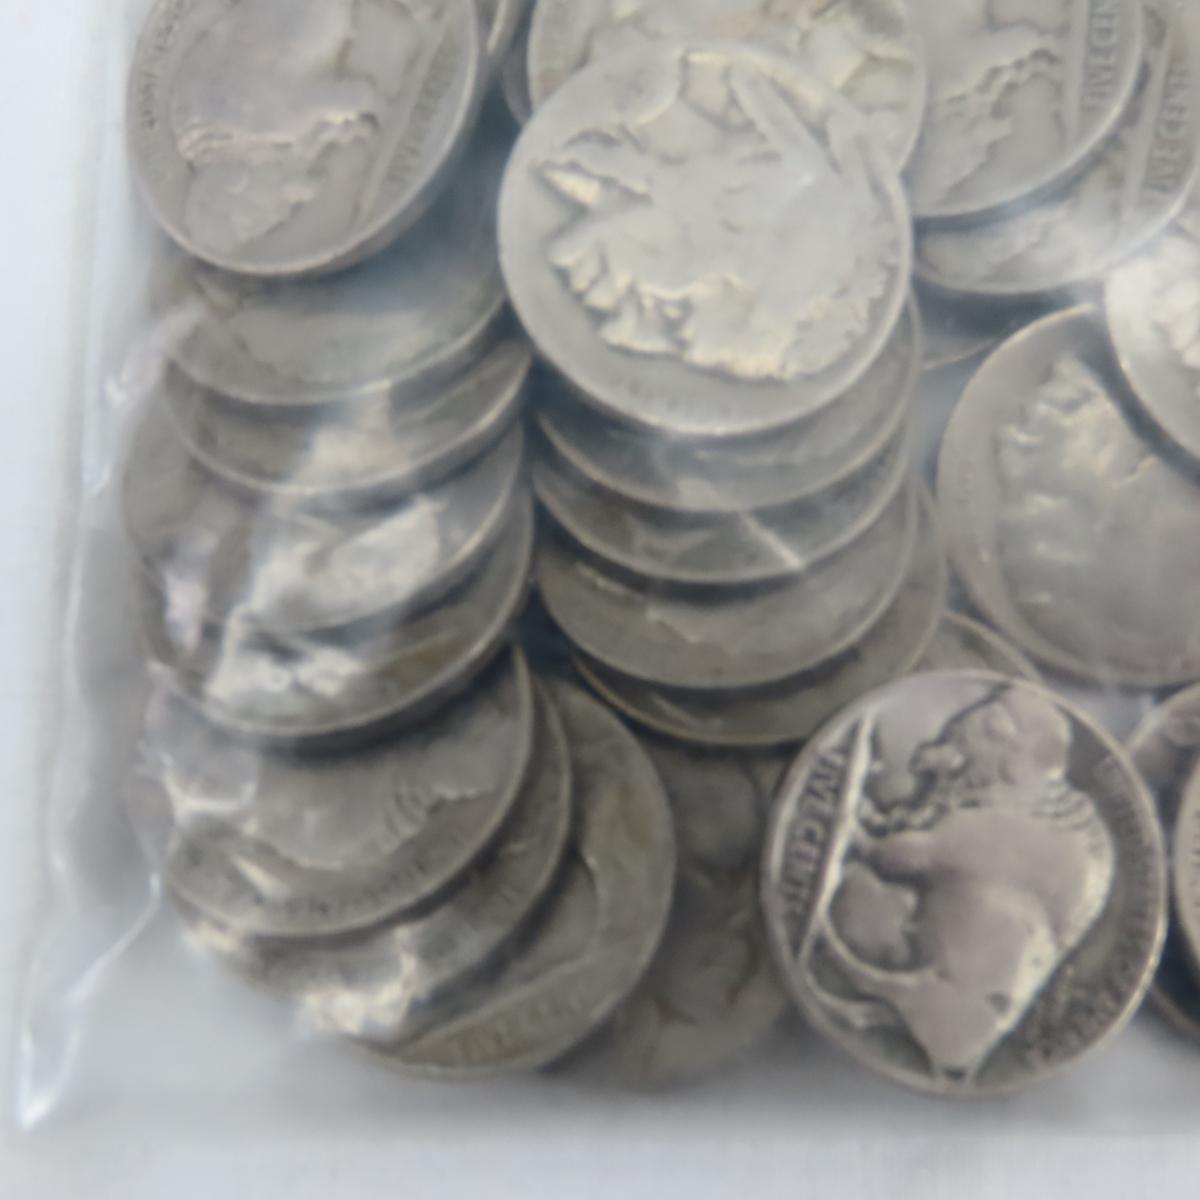 1 pound of Buffalo Nickels, most are 1930's